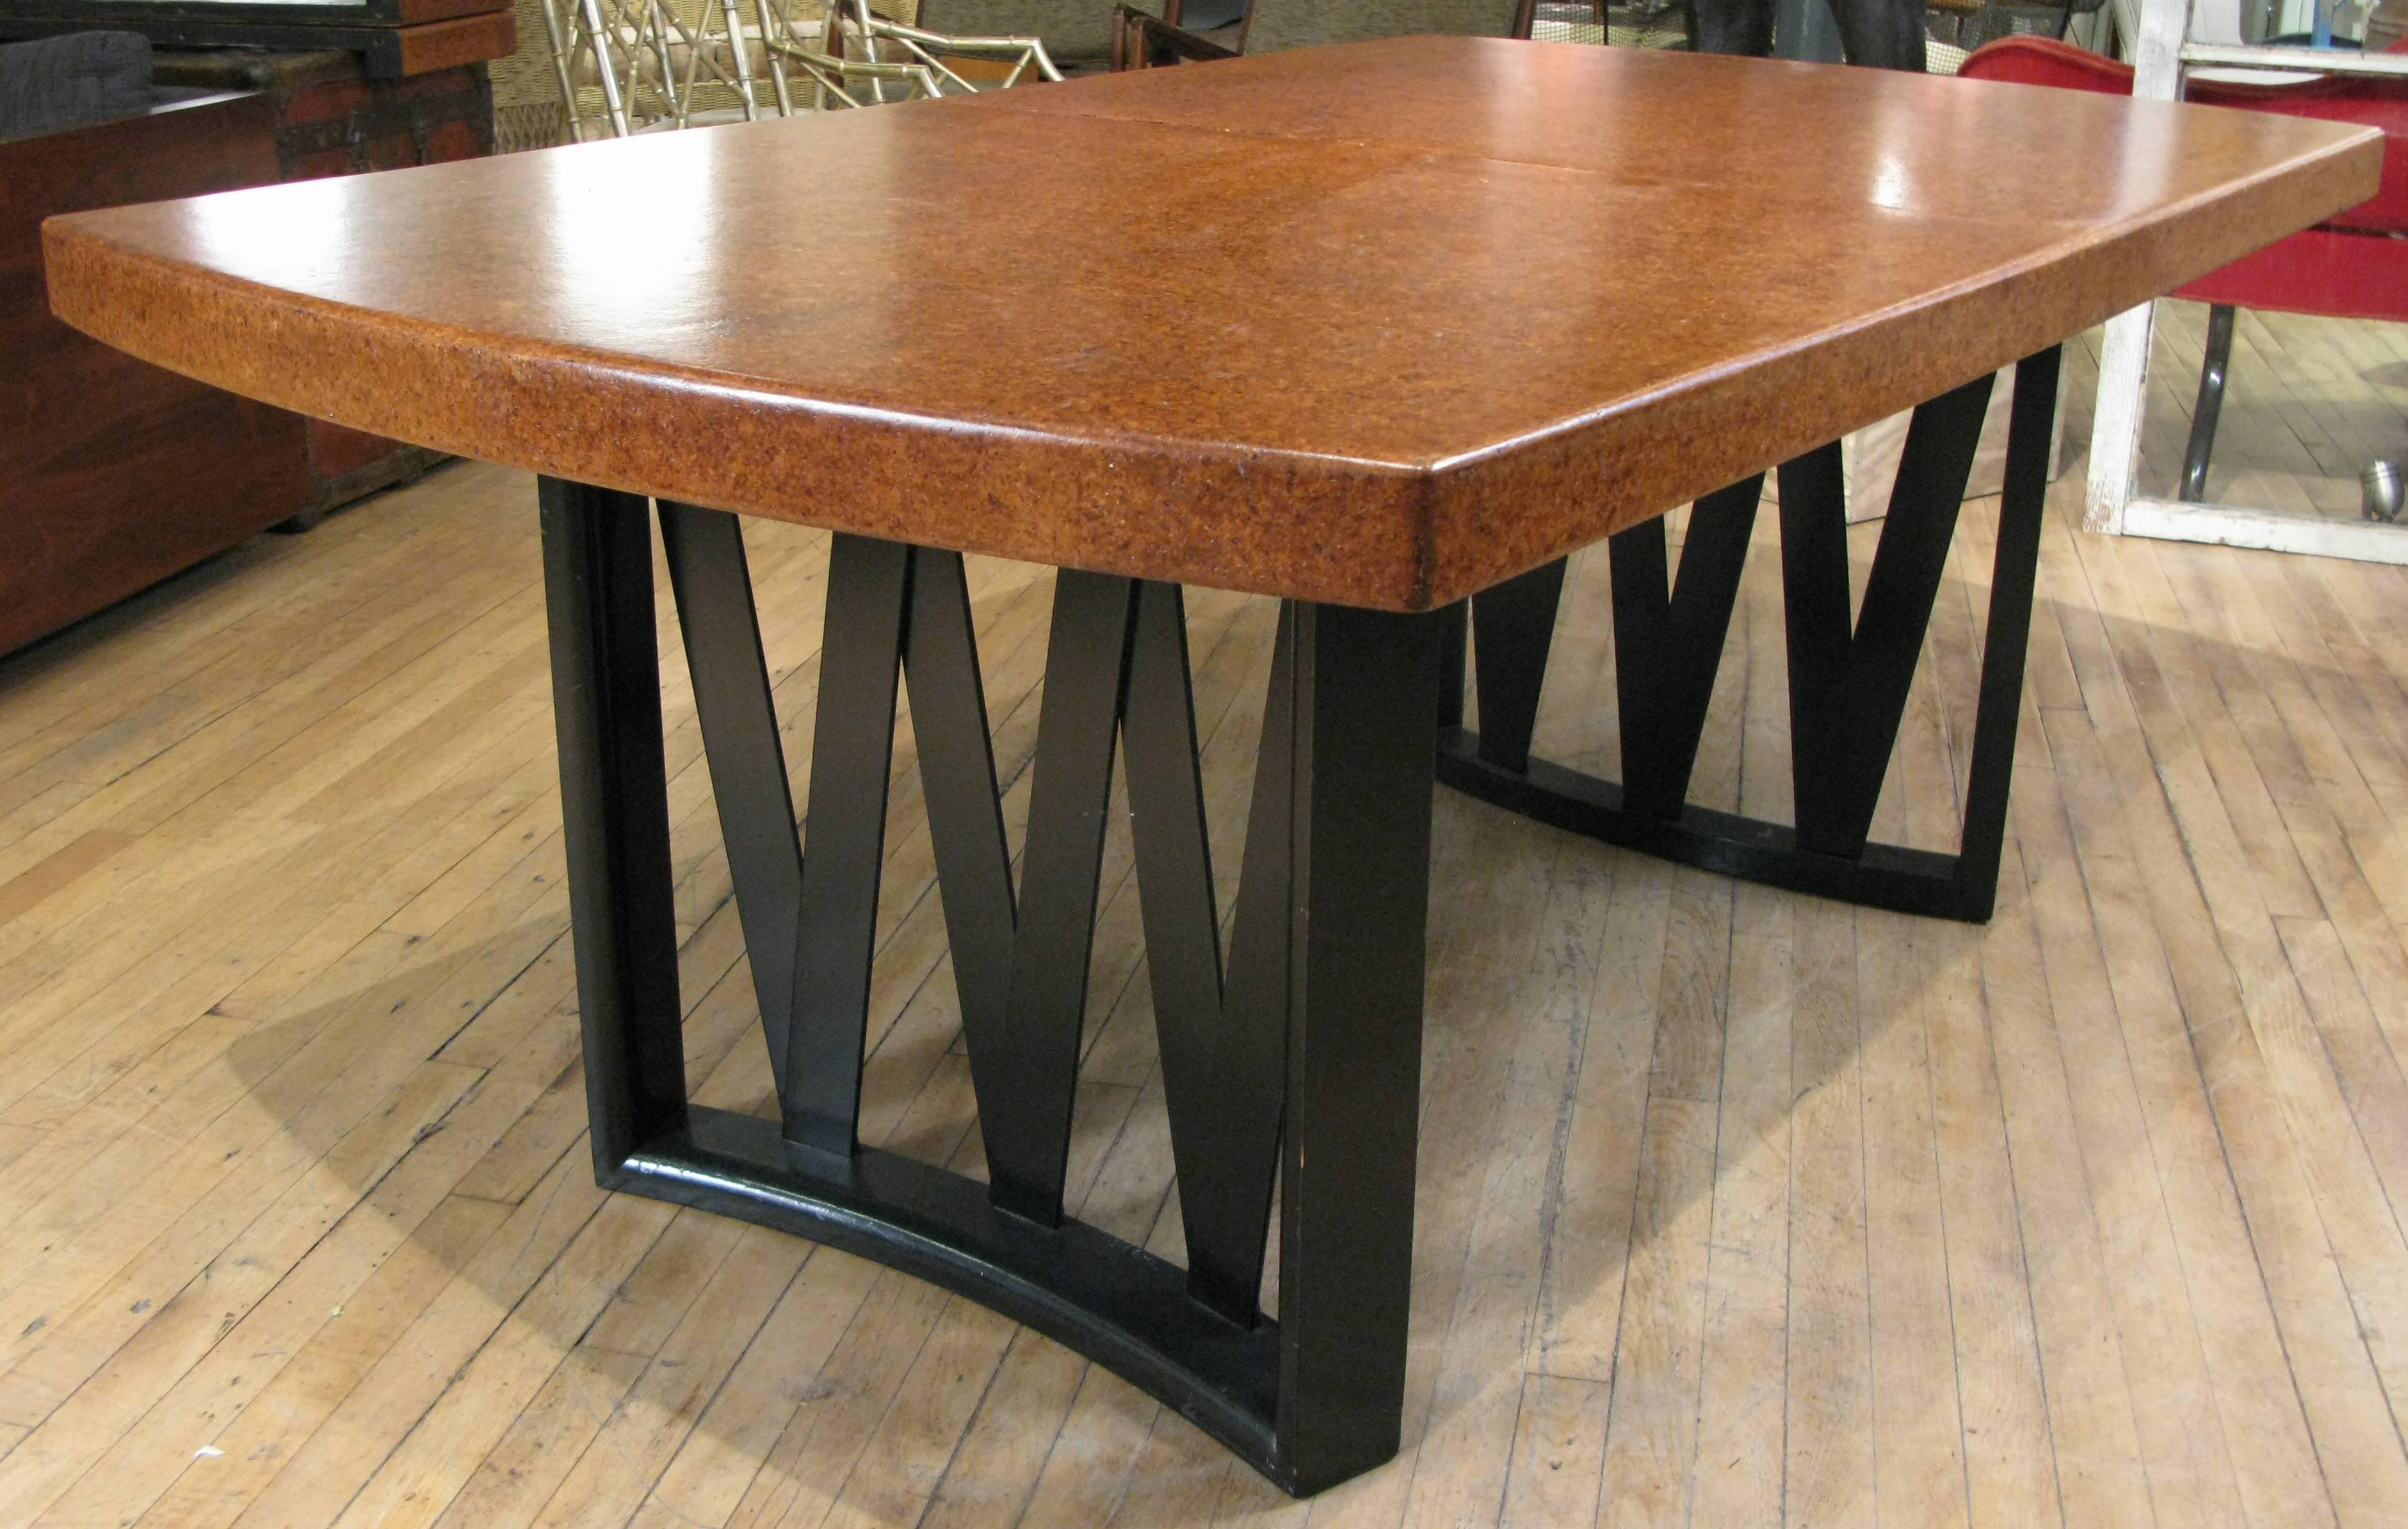 A Classic 1940s extension dining table by Paul Frankl with criss-cross curved ebonized mahogany bases and lacquered cork top. Beautiful warm color on the cork top, with two extension 12